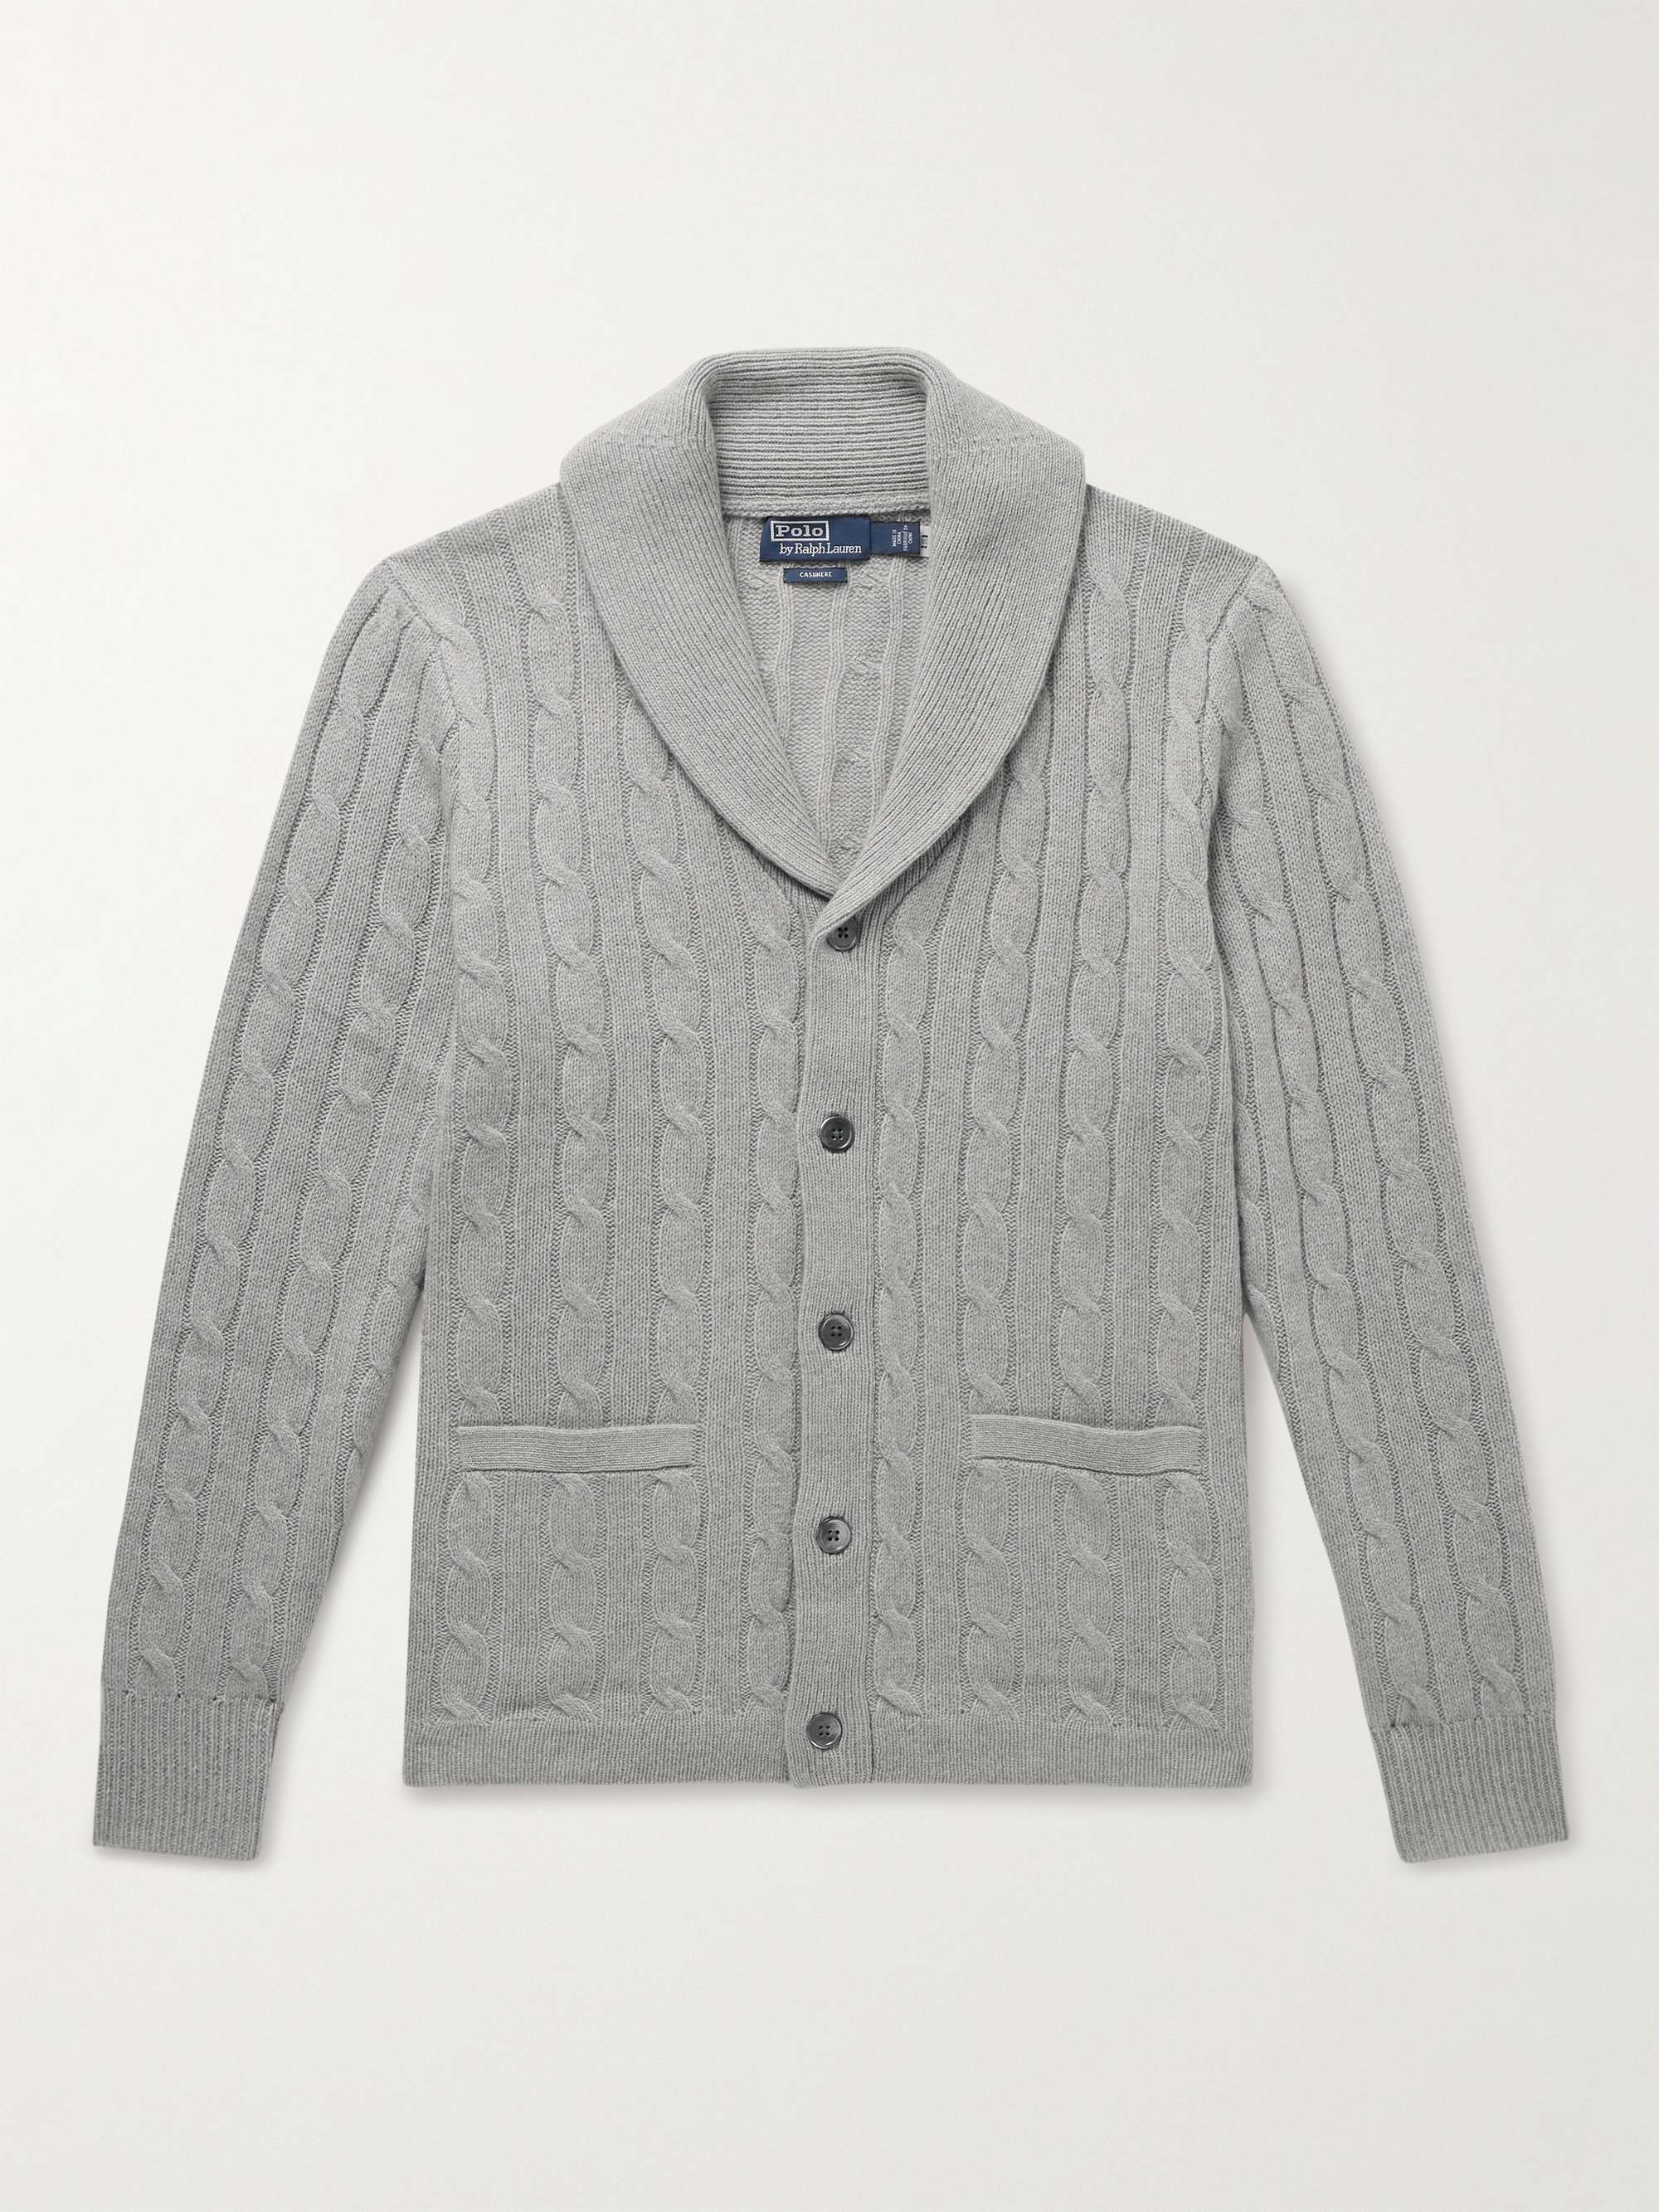 POLO RALPH LAUREN Shawl-Collar Cable-Knit Cashmere Cardigan,Gray